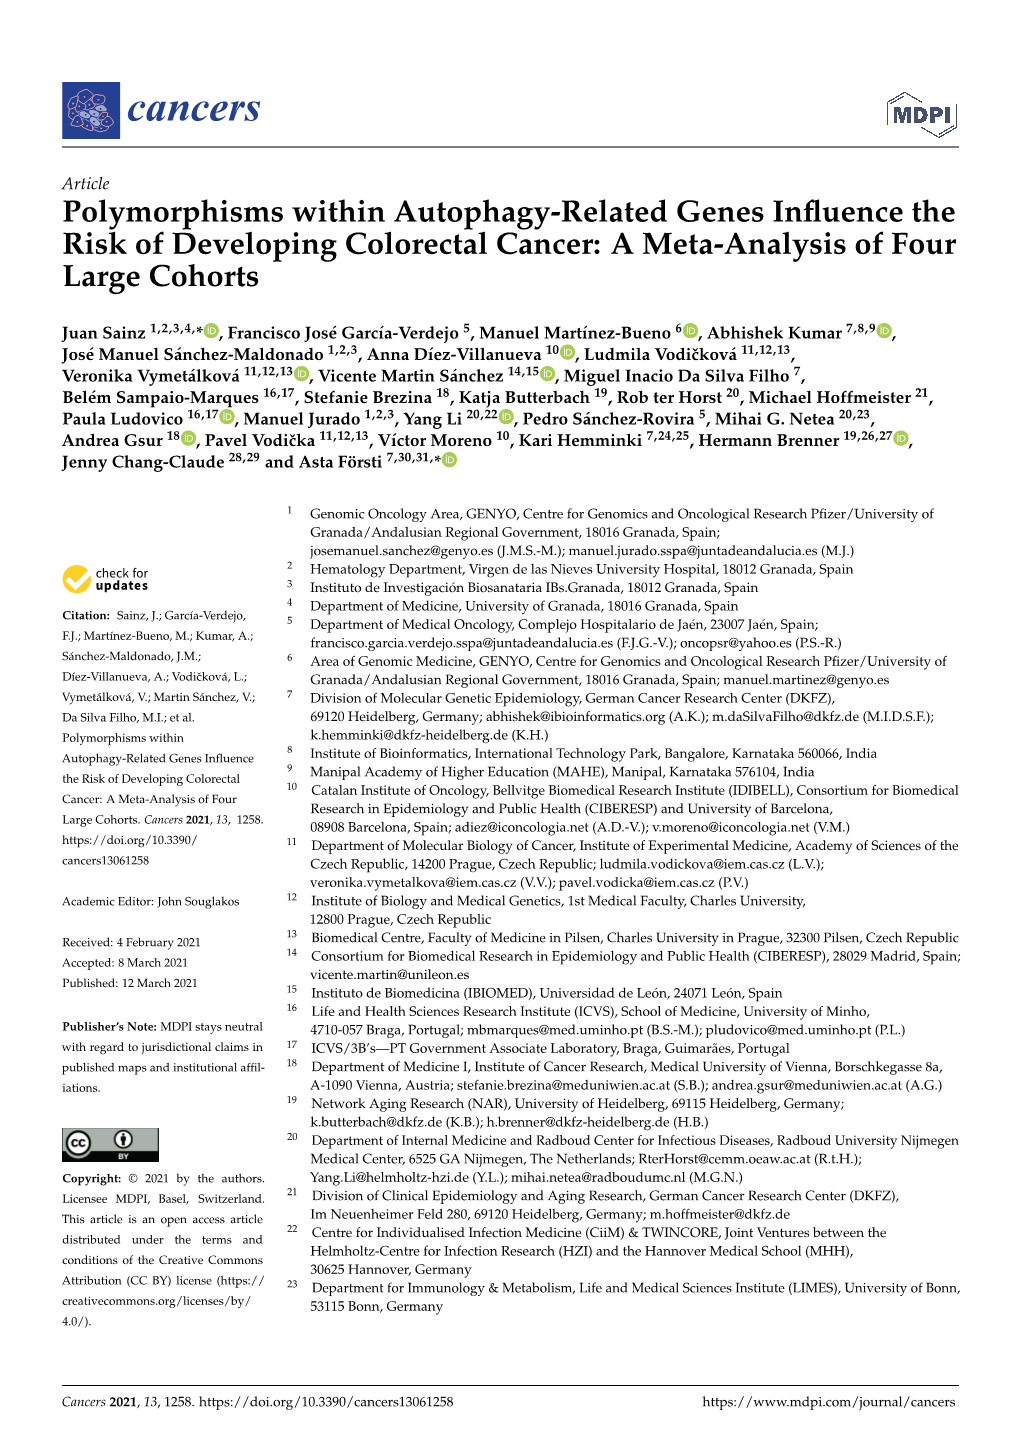 Polymorphisms Within Autophagy-Related Genes Inﬂuence the Risk of Developing Colorectal Cancer: a Meta-Analysis of Four Large Cohorts